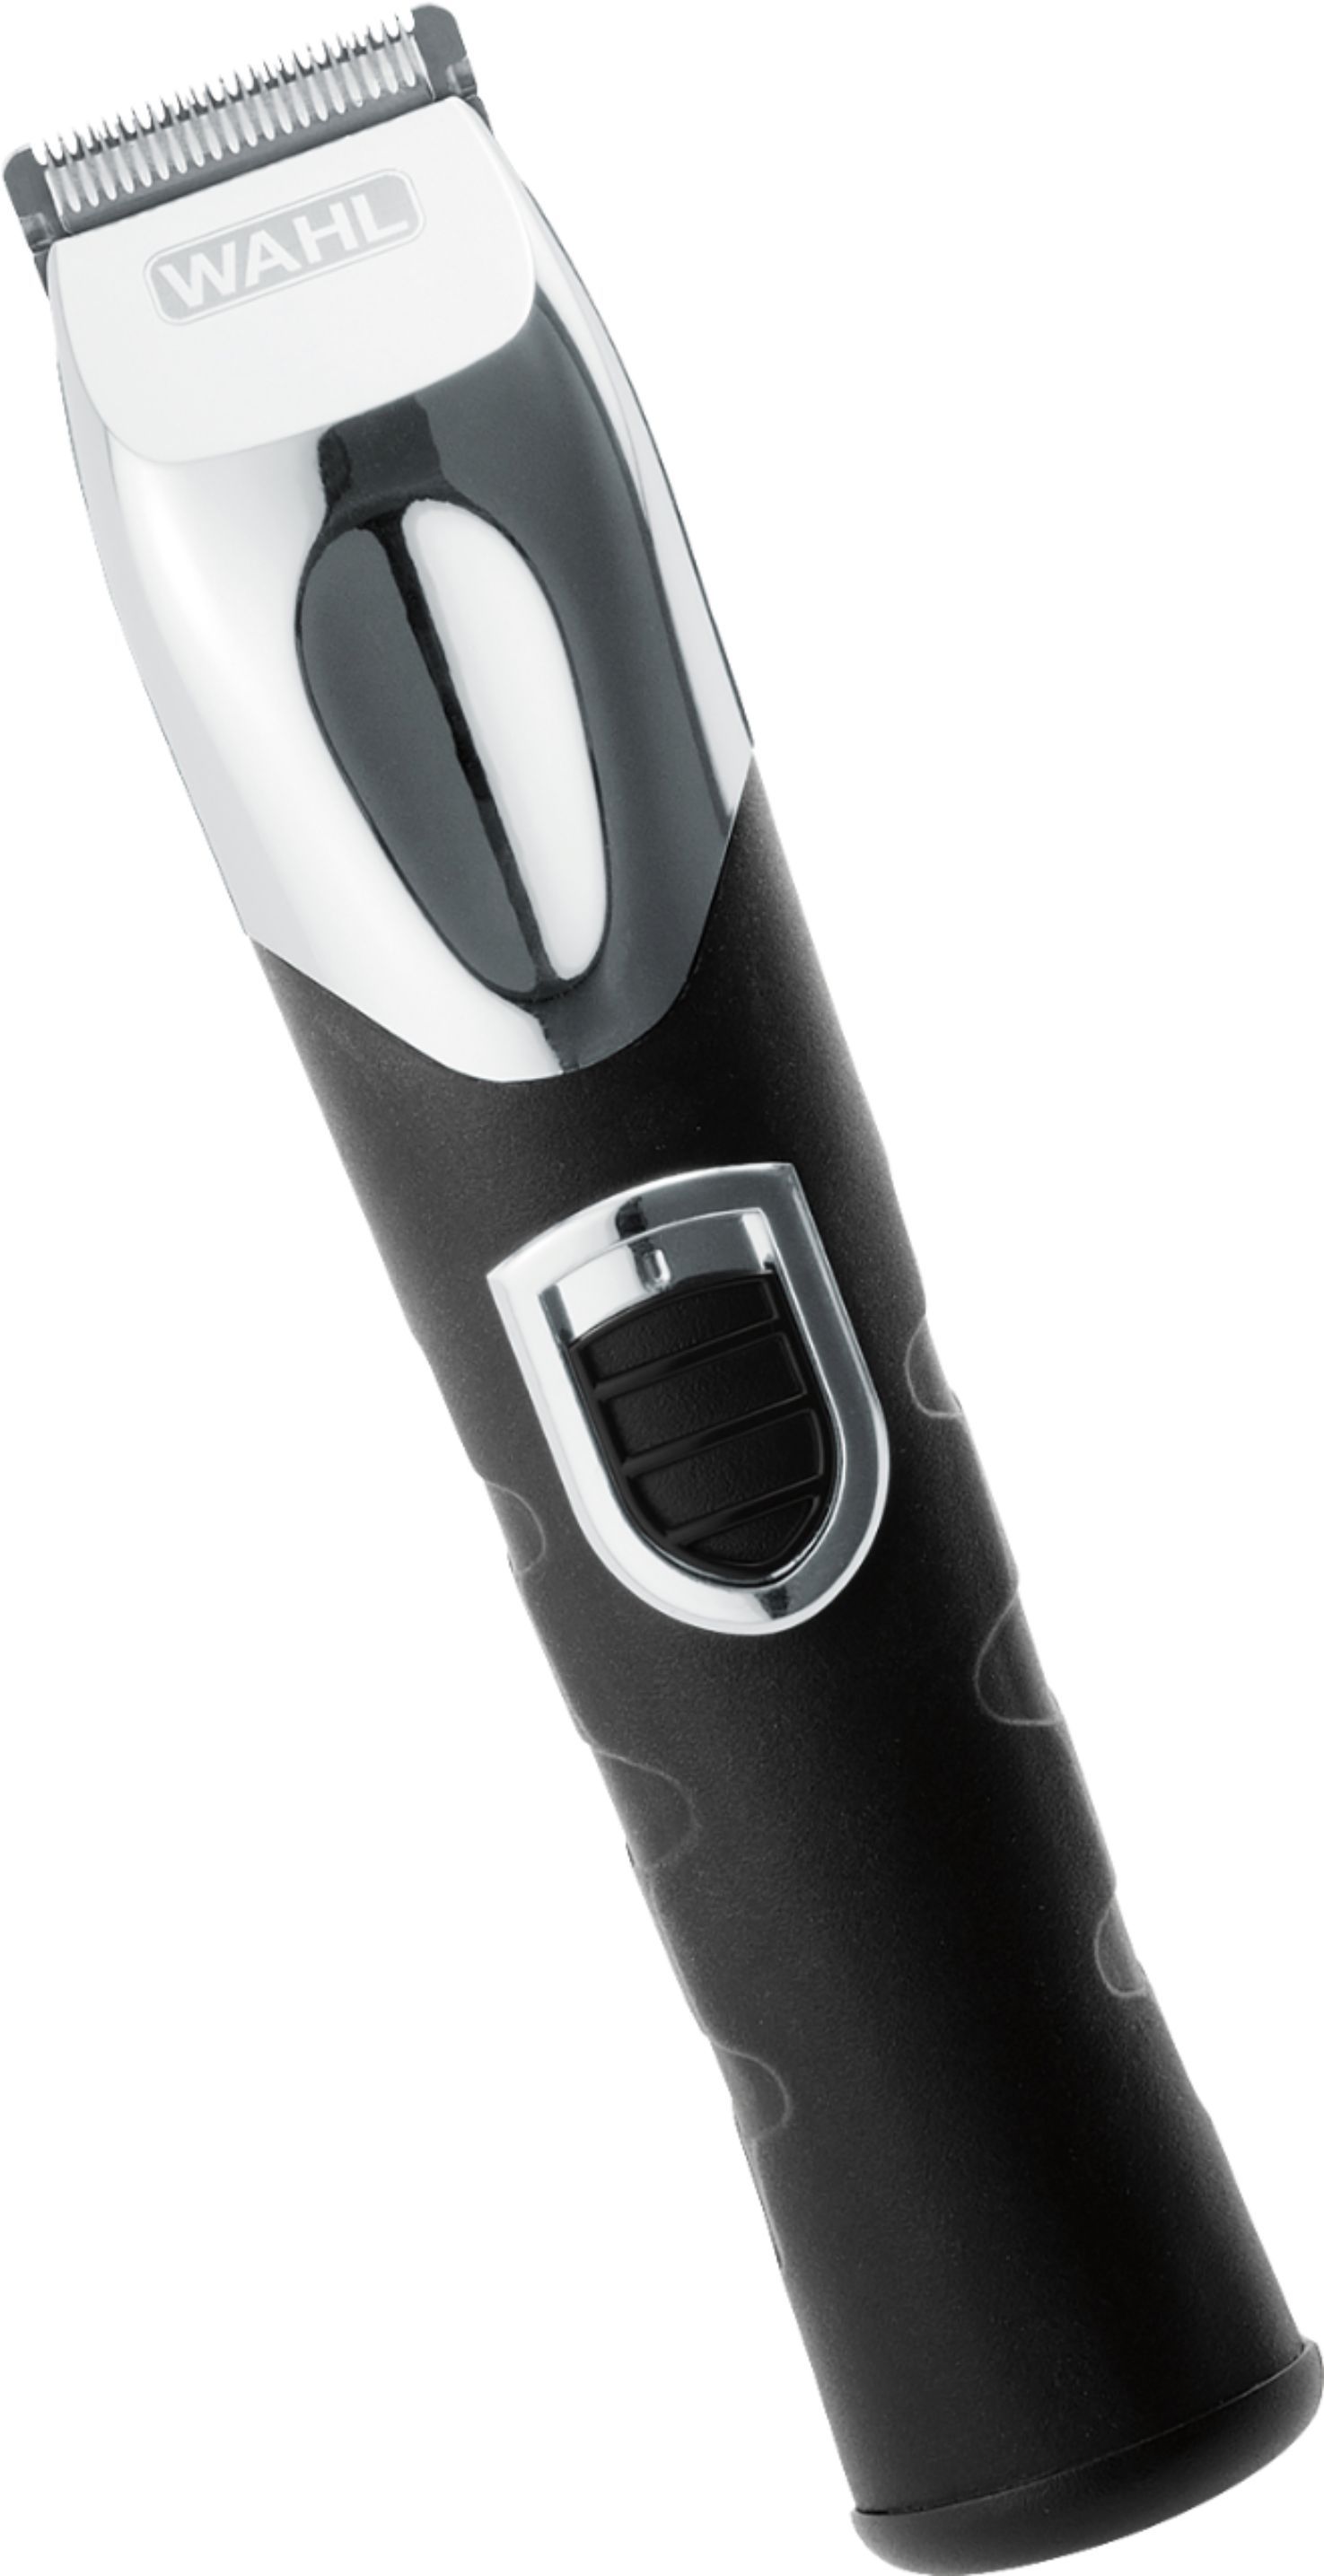 Wahl Trimmer with 13 Guide Combs Black/Silver 09854-2401 - Best Buy | Best Buy U.S.